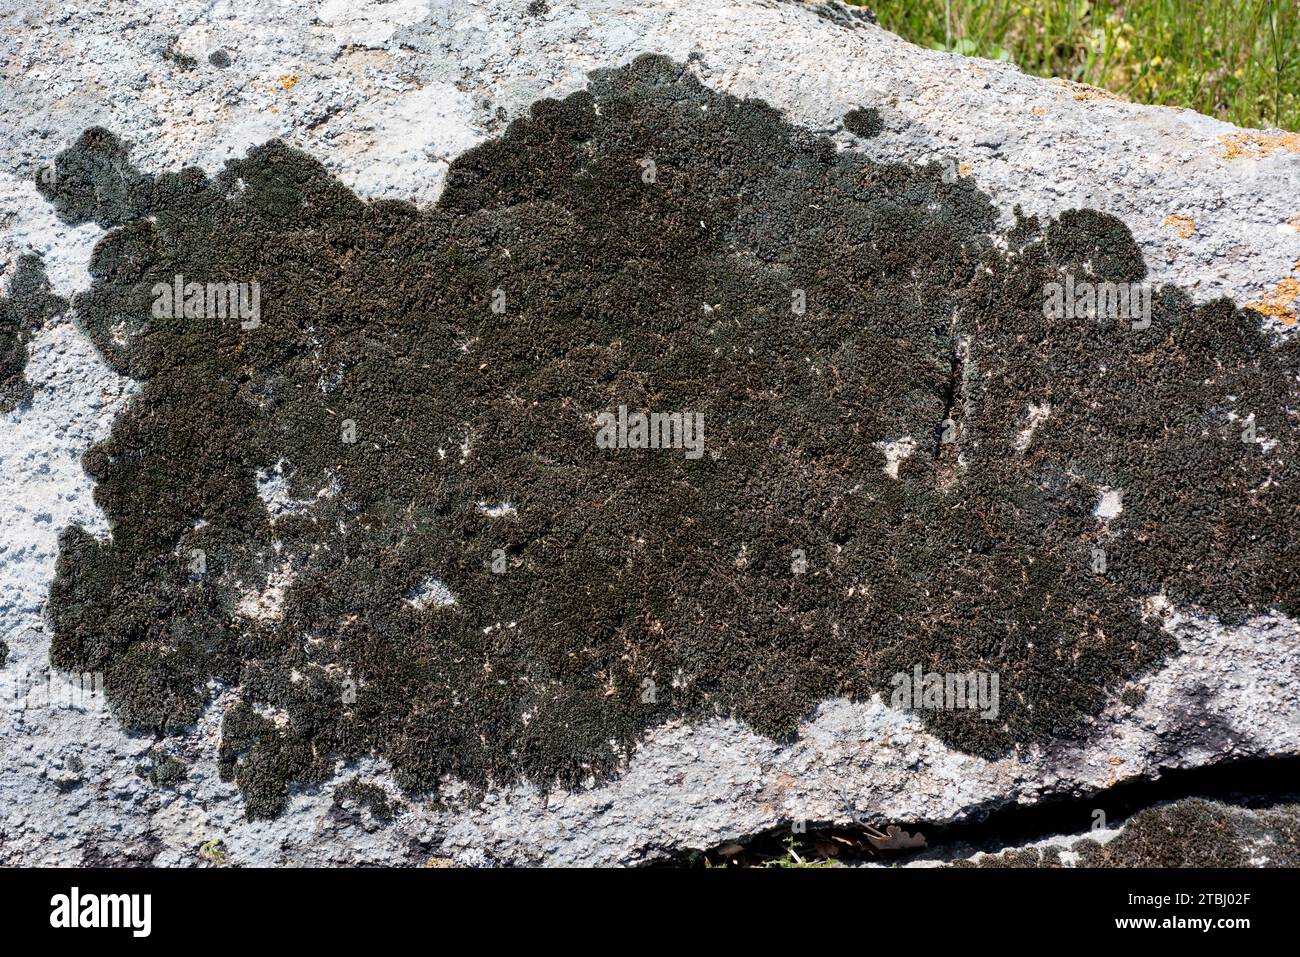 Dry rock moss (Grimmia laevigata) is a cosmopolitan moss. This photo was taken in Vilaut, Girona province, Catalonia, Spain. Stock Photo